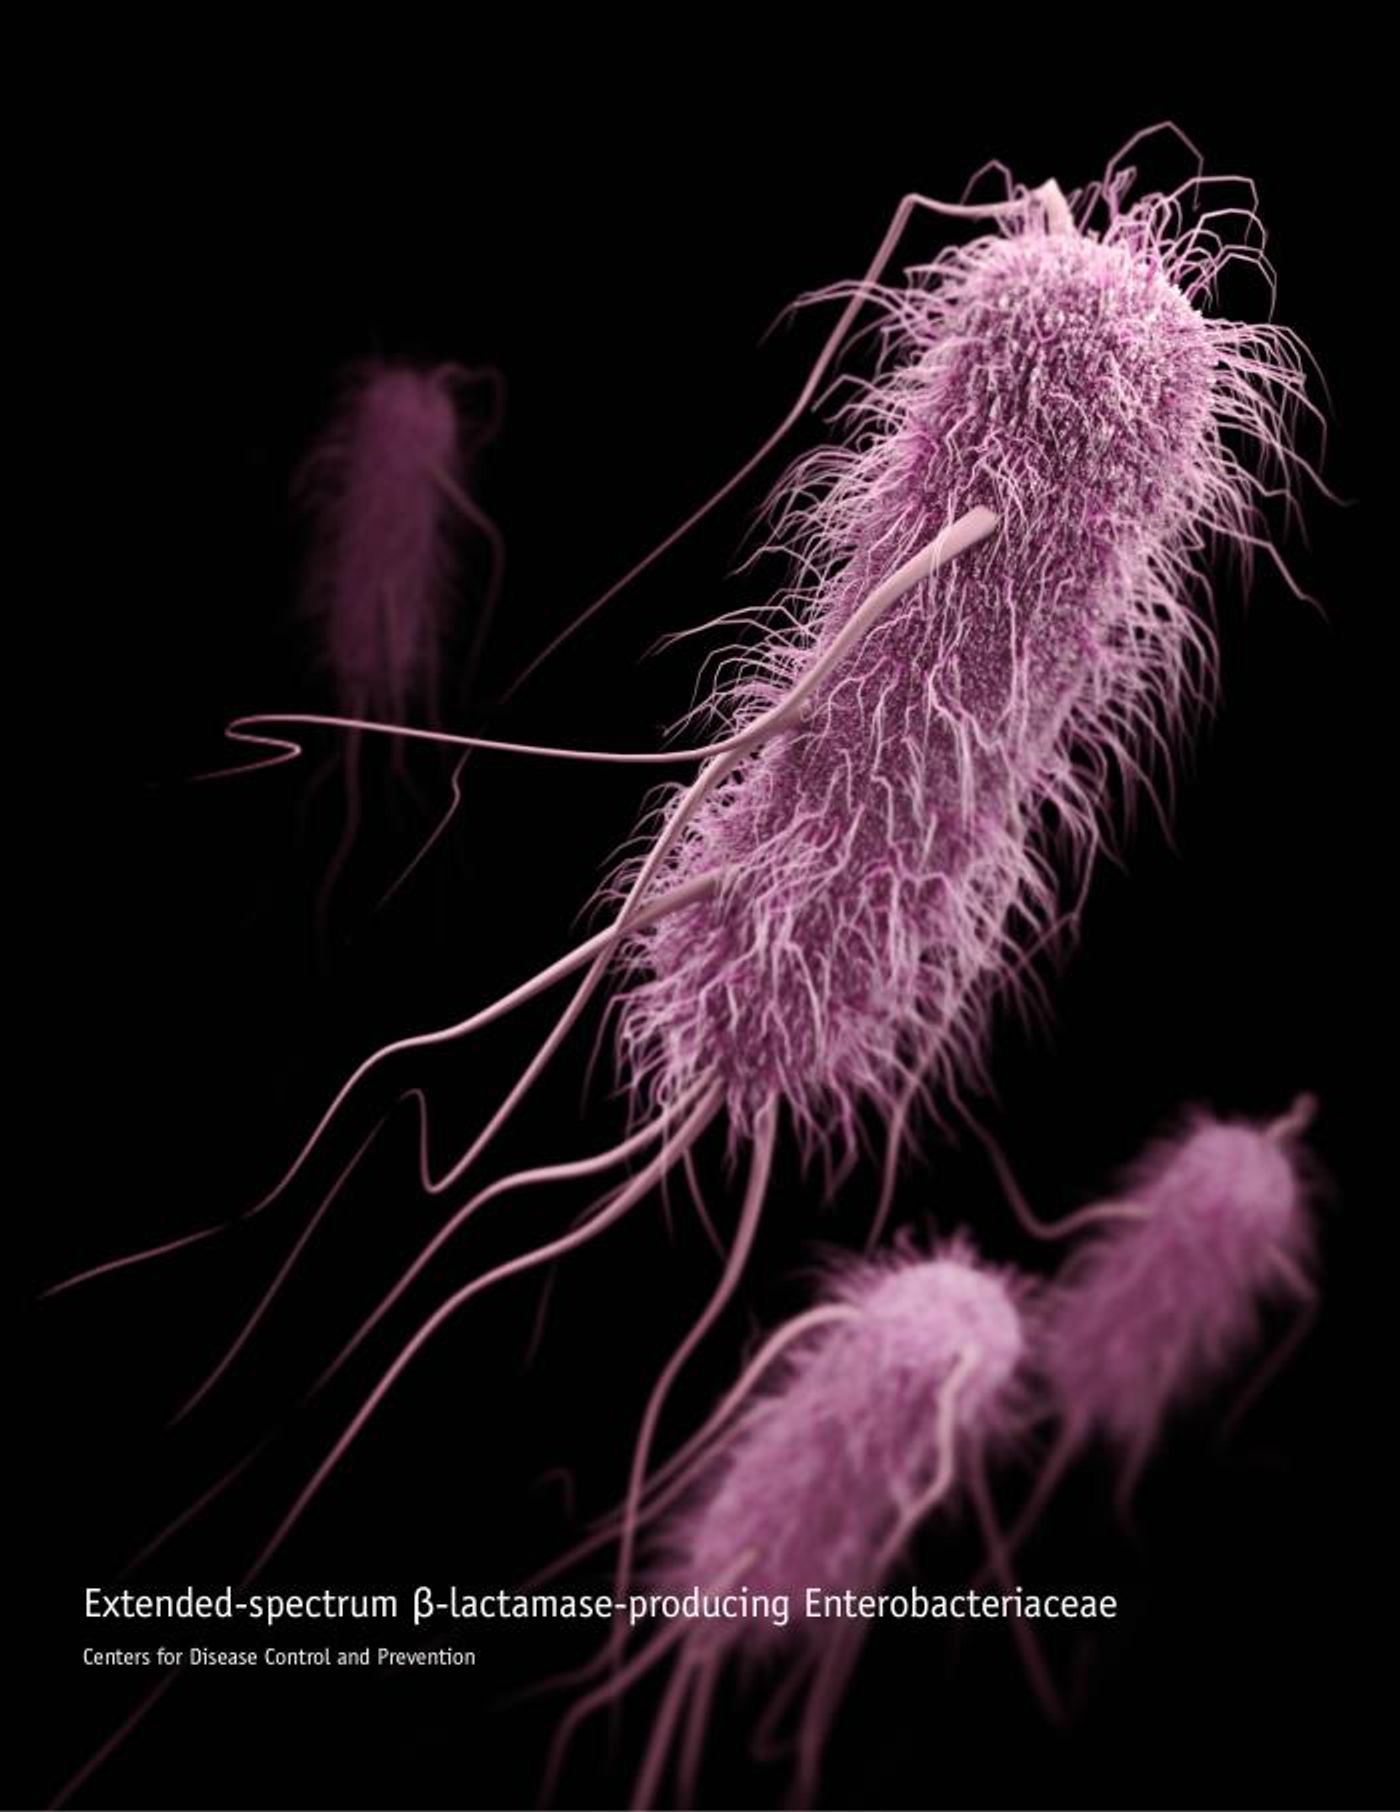 A three-dimensional (3D), computer-generated image of a group of extended-spectrum ß-lactamase-producing (ESBLs) Enterobacteriaceae bacteria, in this case, Escherichia coli. / Credit: CDC/ Antibiotic Resistance Coordination and Strategy Unit / Credit: Alissa Eckert - Medical Illustrator